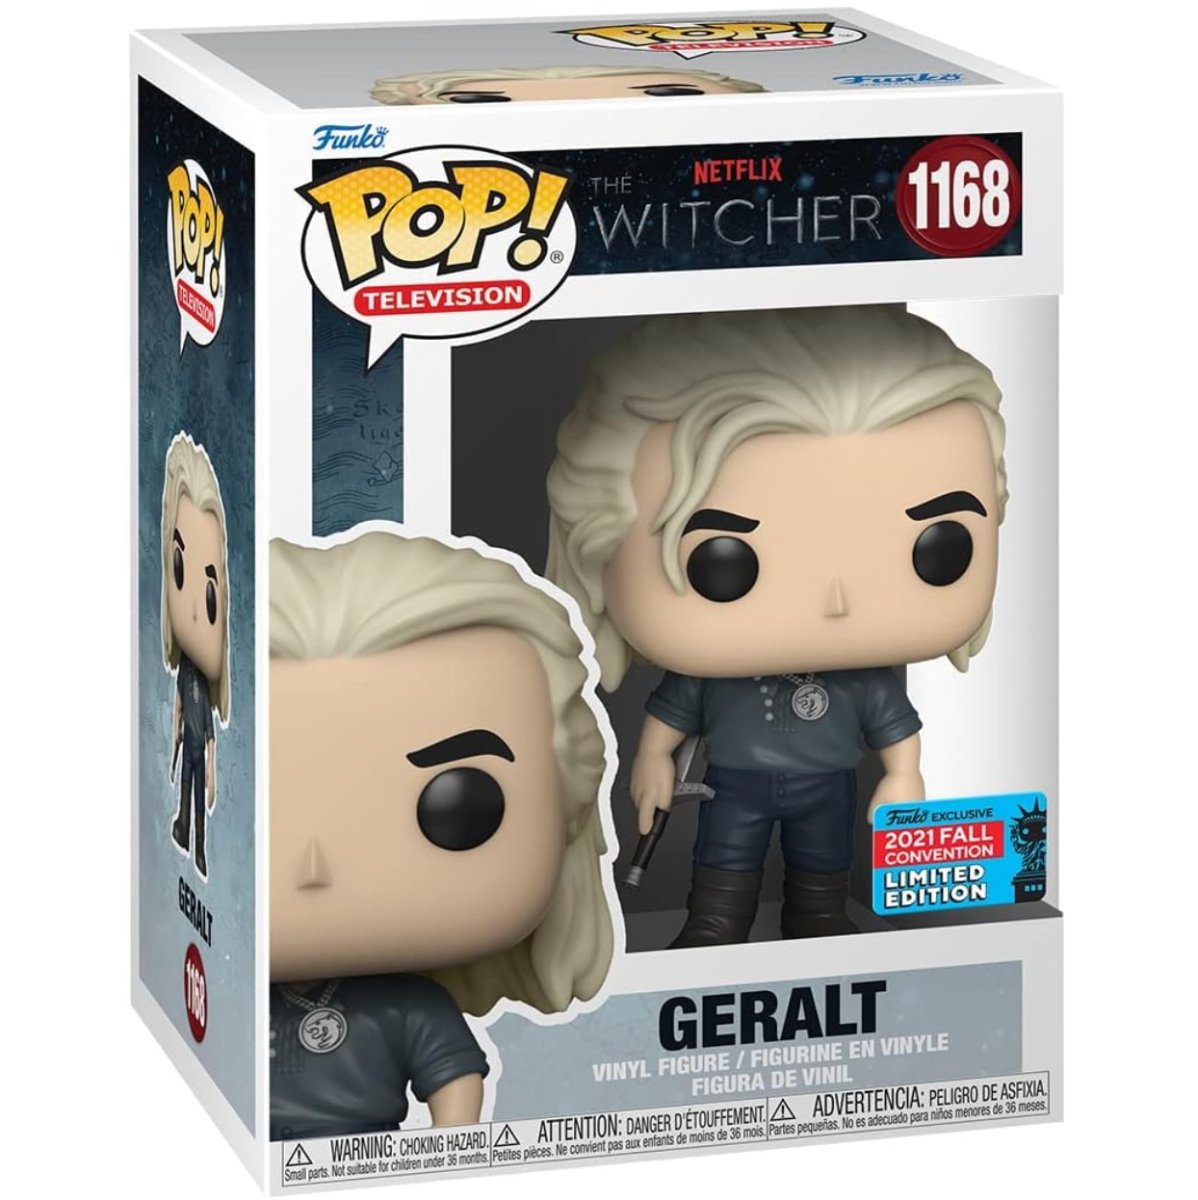 The Witcher - Geralt (2021 Fall Convention Limited Edition) #1168 - Funko Pop! Vinyl Television - Persona Toys